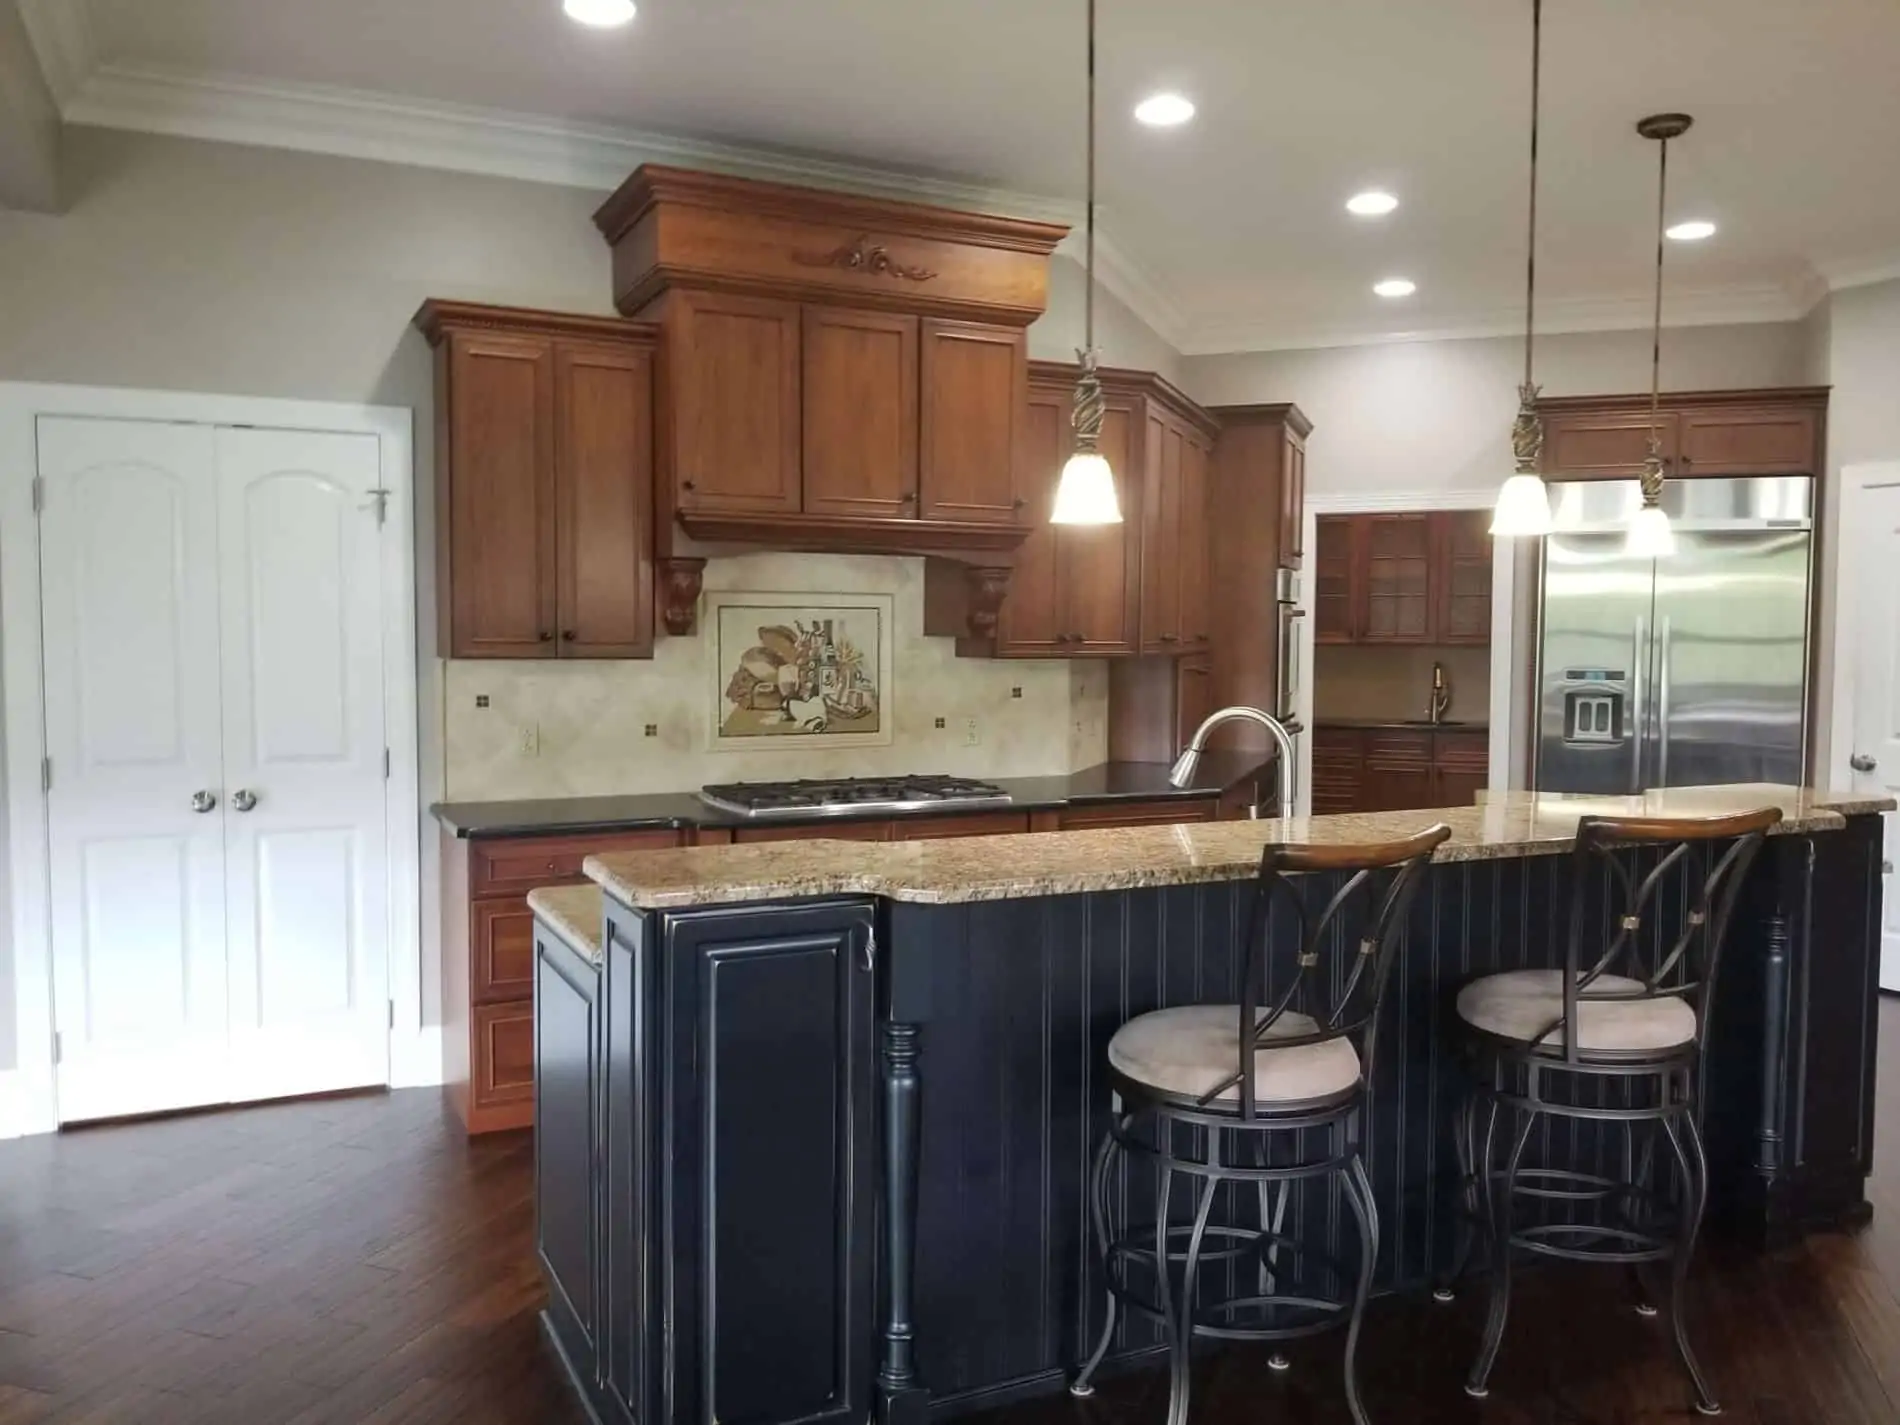 Kitchen Restoration Contractor finishes after Water Damage